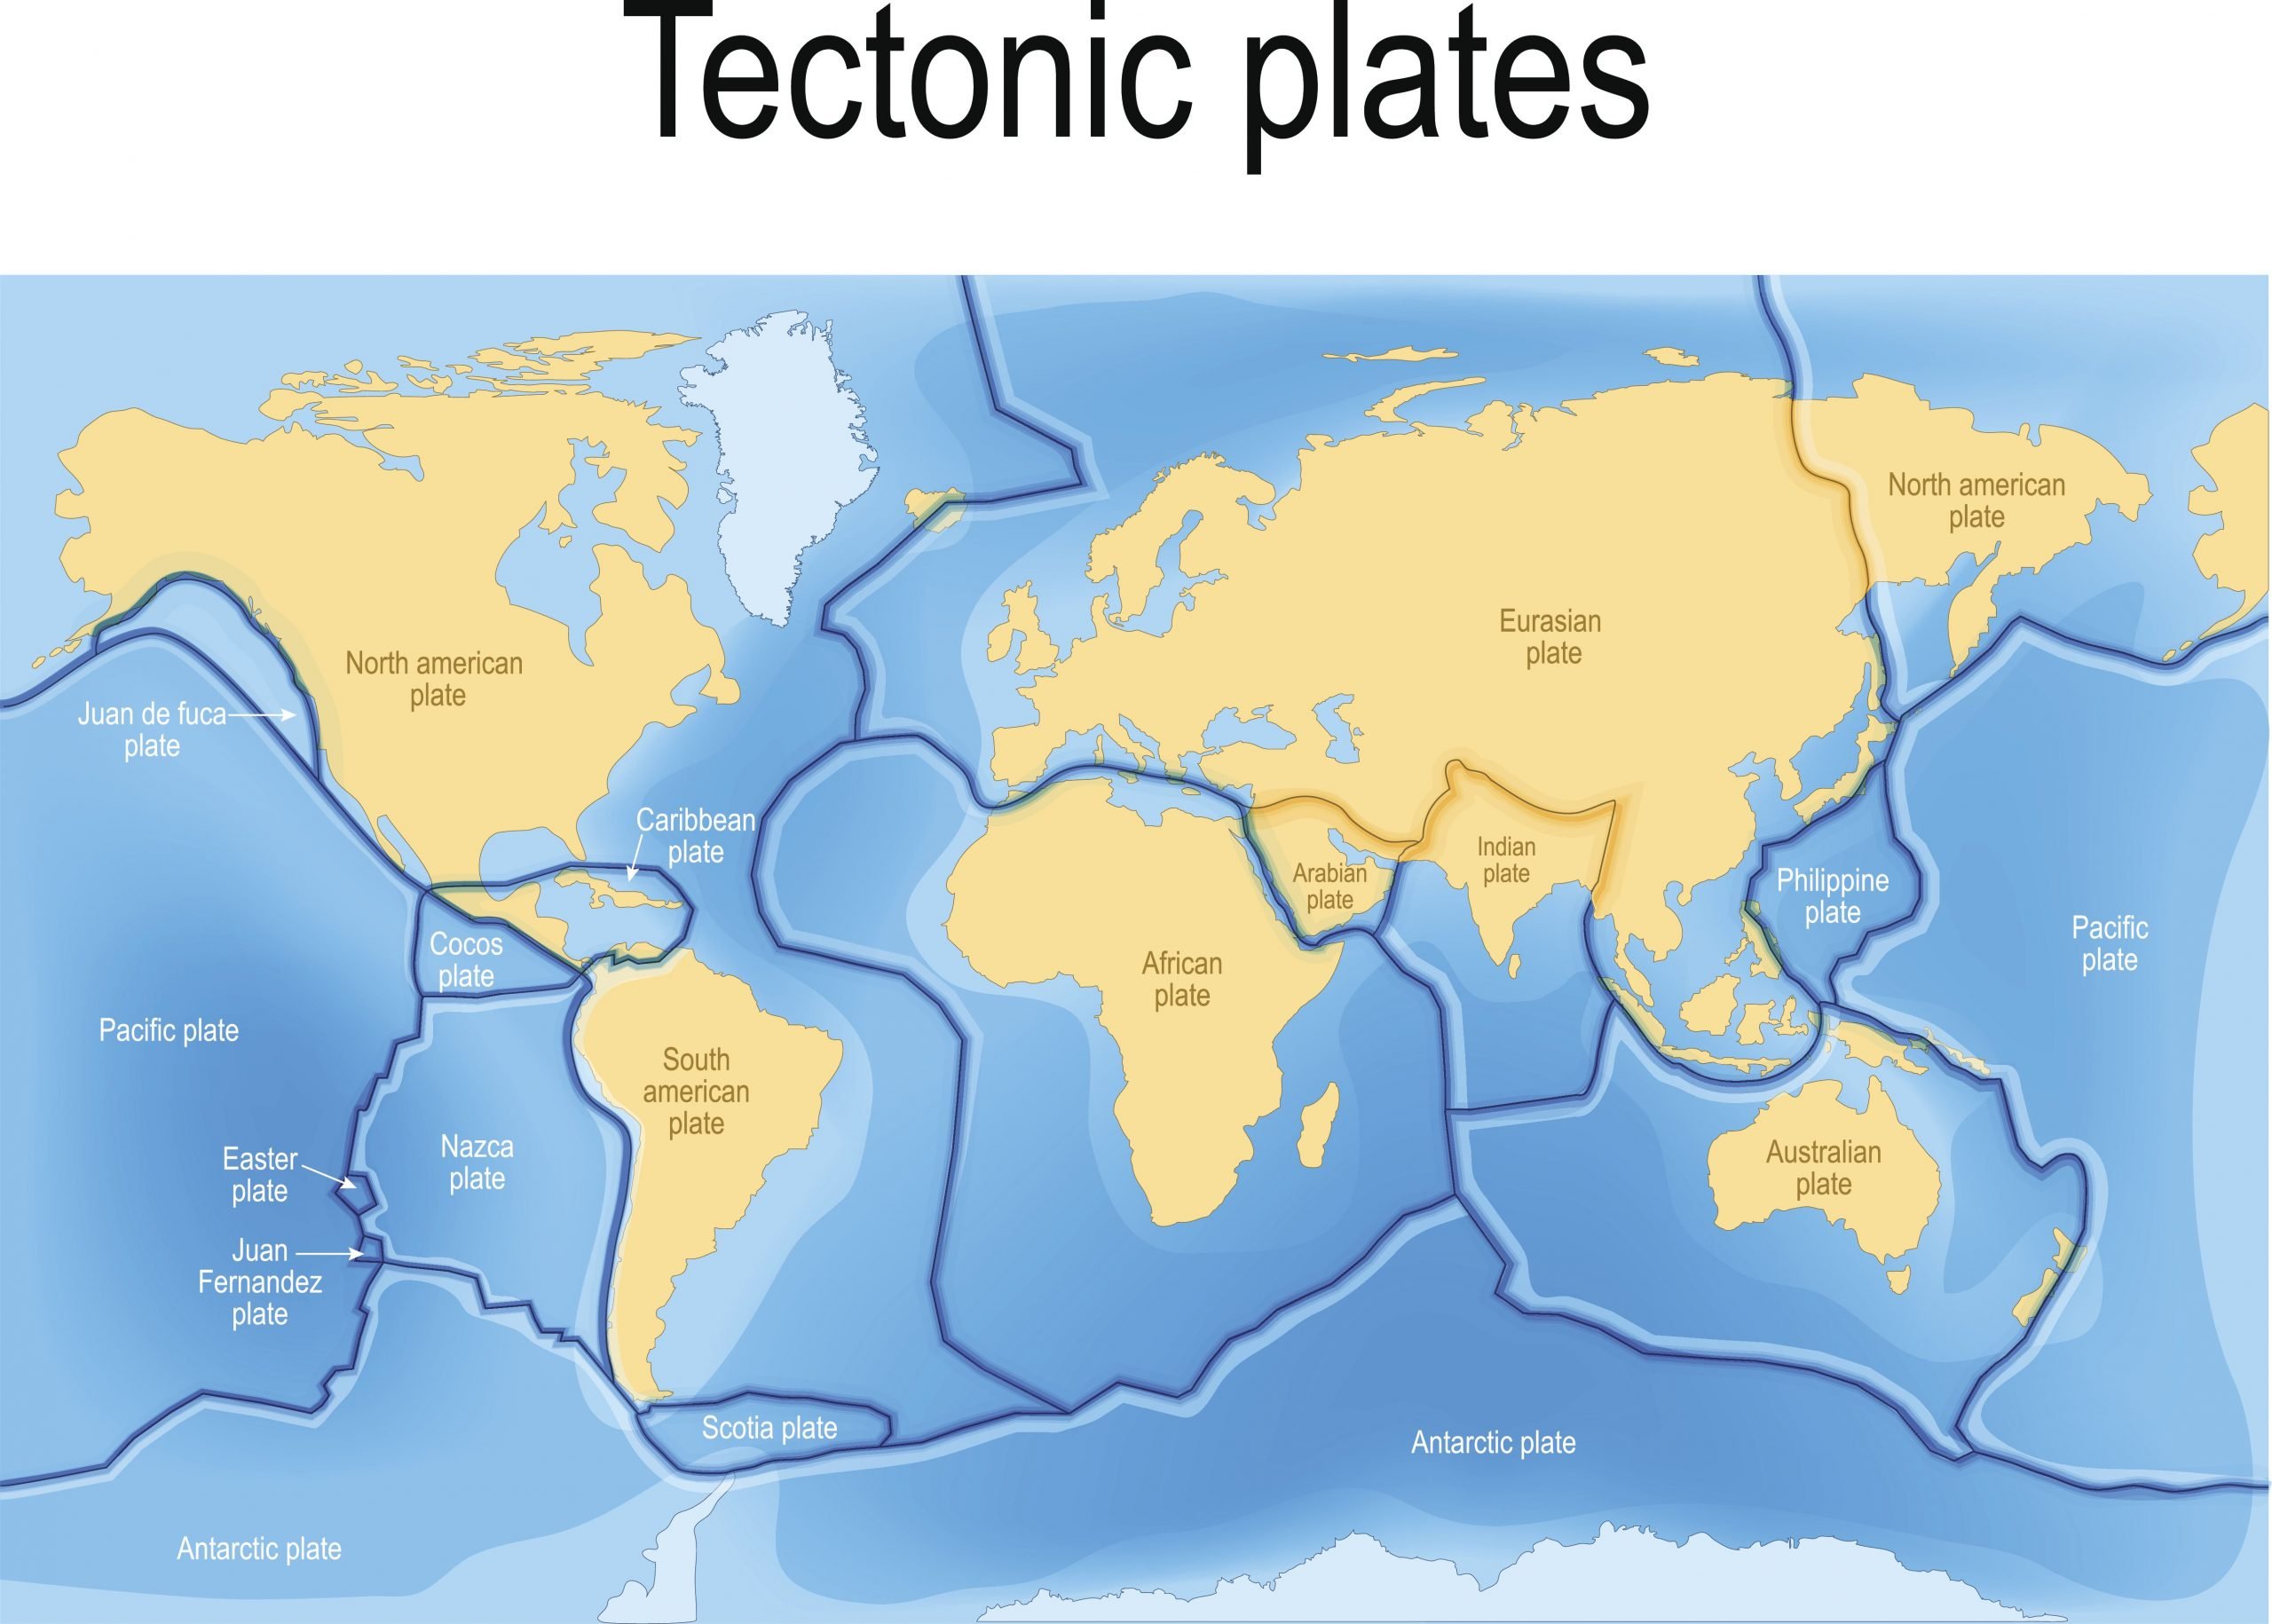 A Map of Tectonic Plates and Their Boundaries